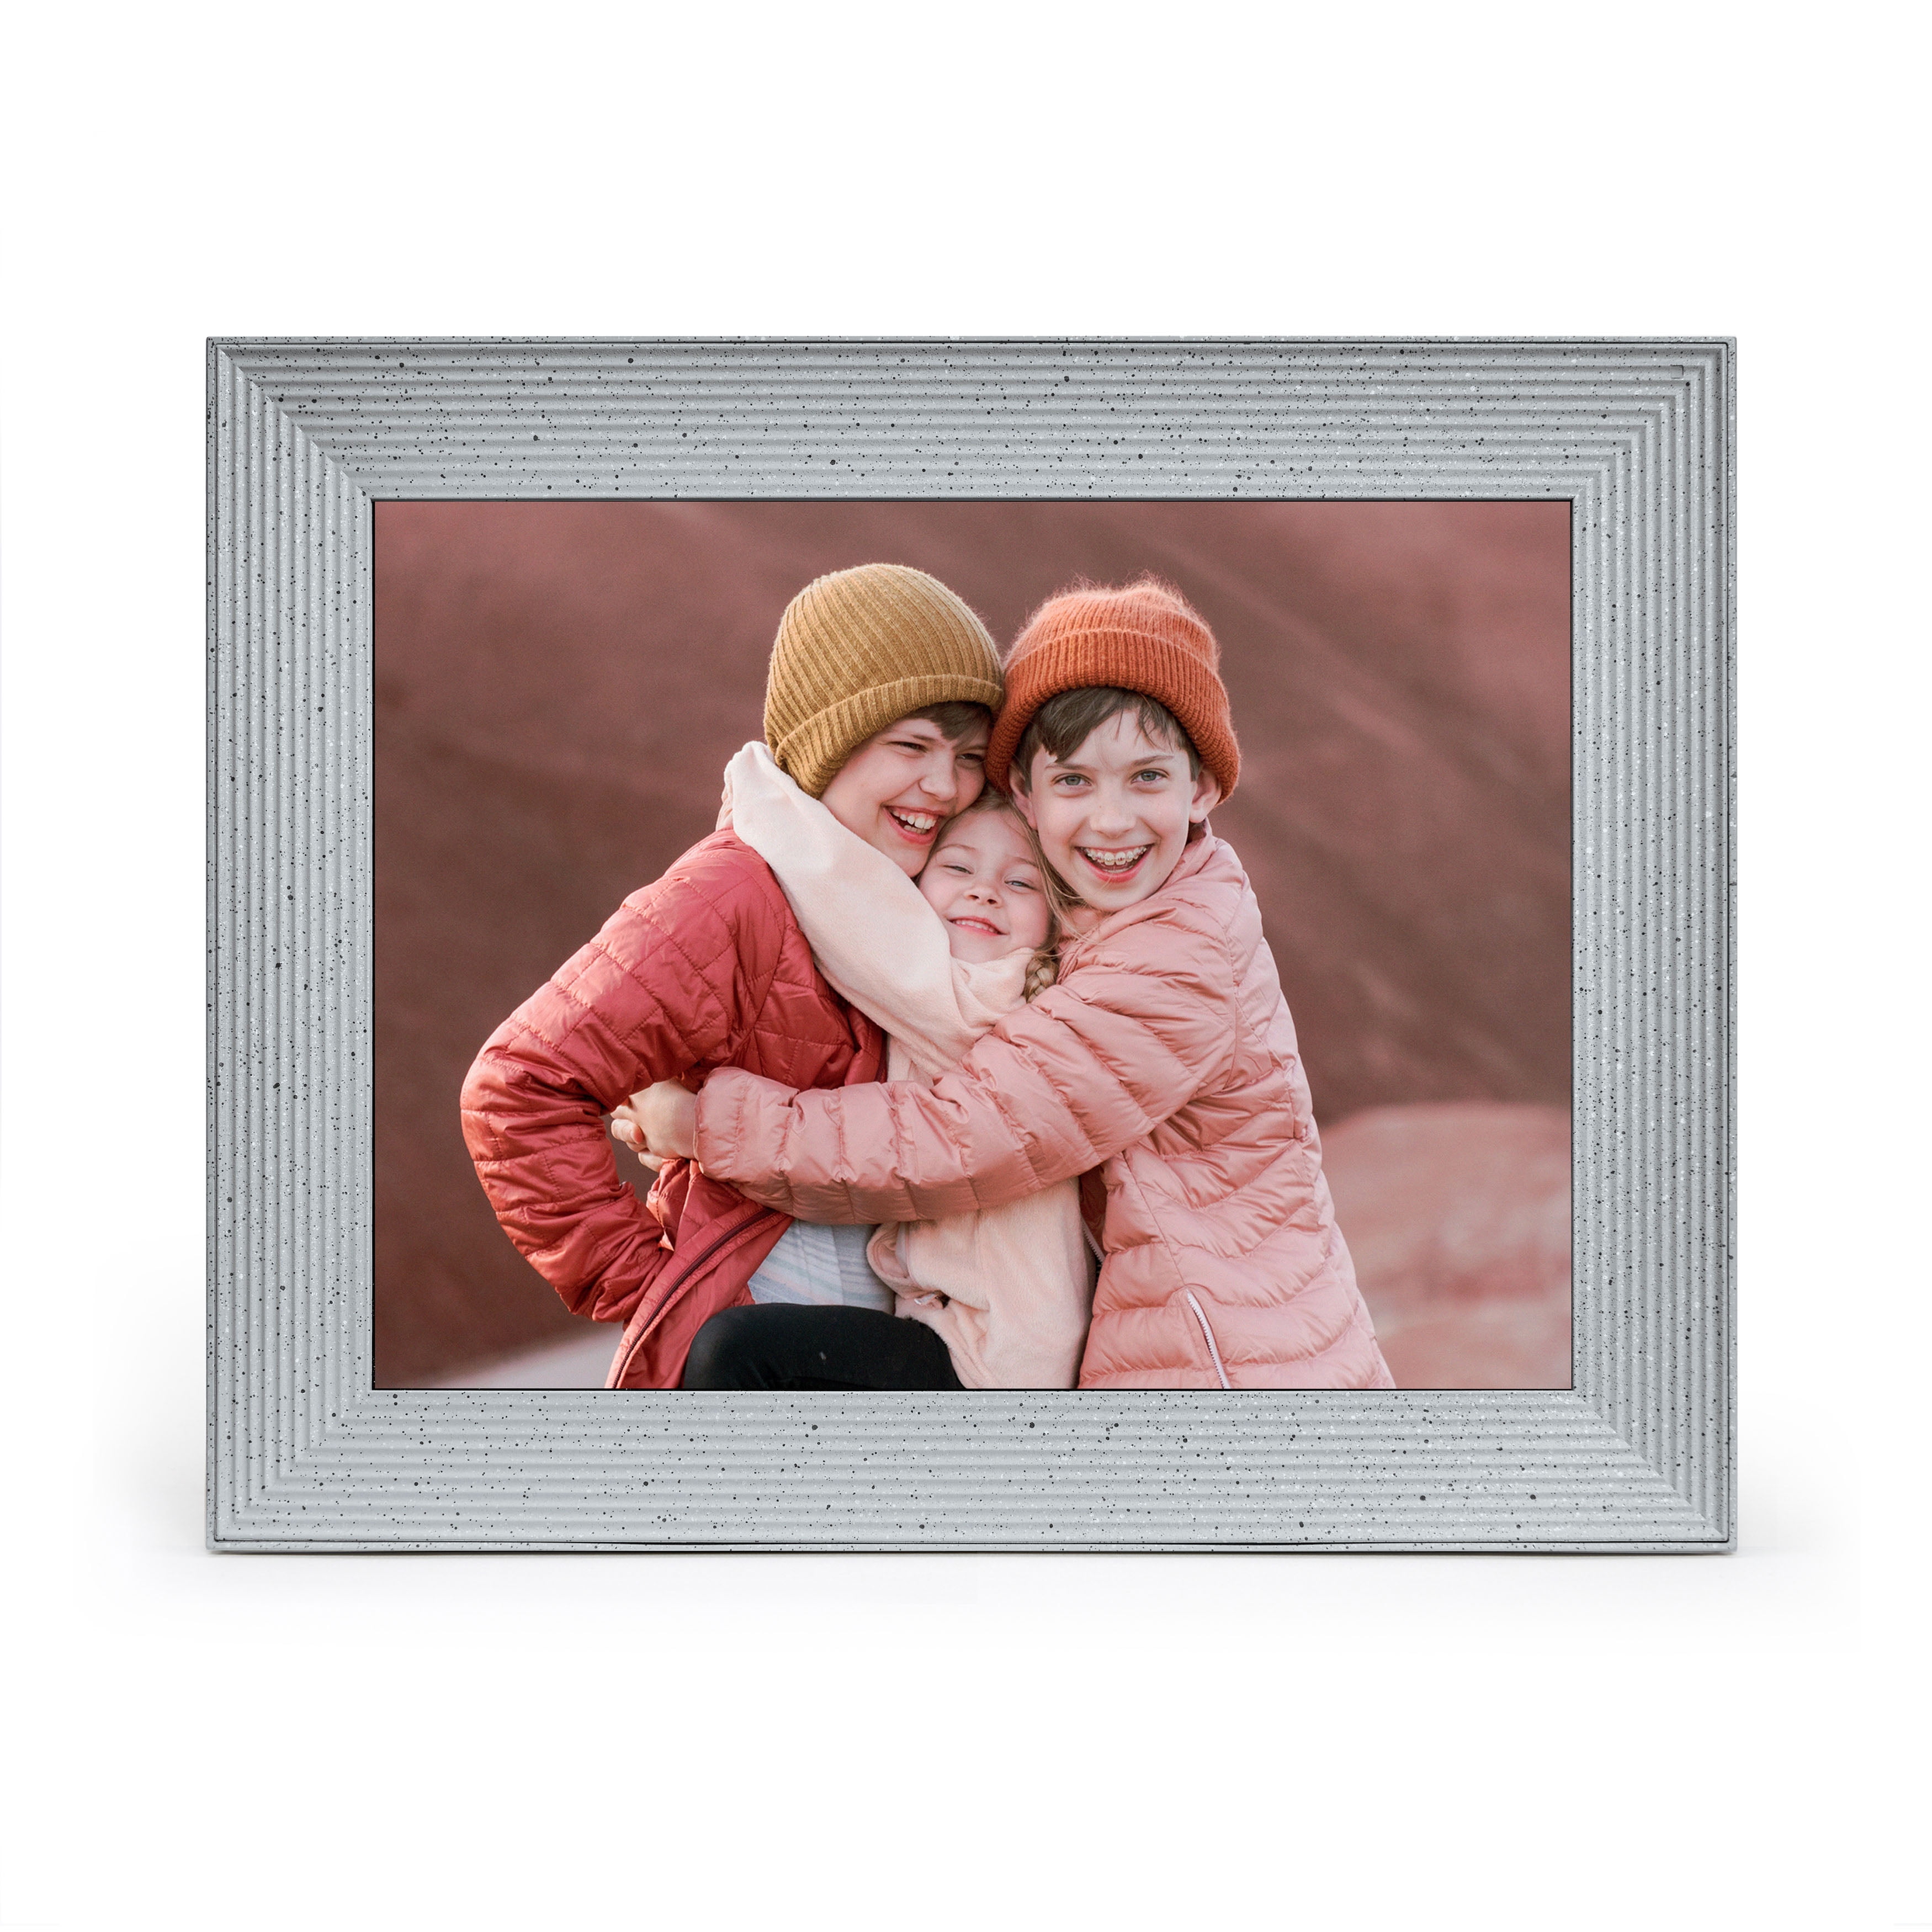 Mason Luxe by Aura Frames 9.7 inch 2K Wi-Fi Digital Picture Frame with Free  Unlimited Storage – Sandstone 